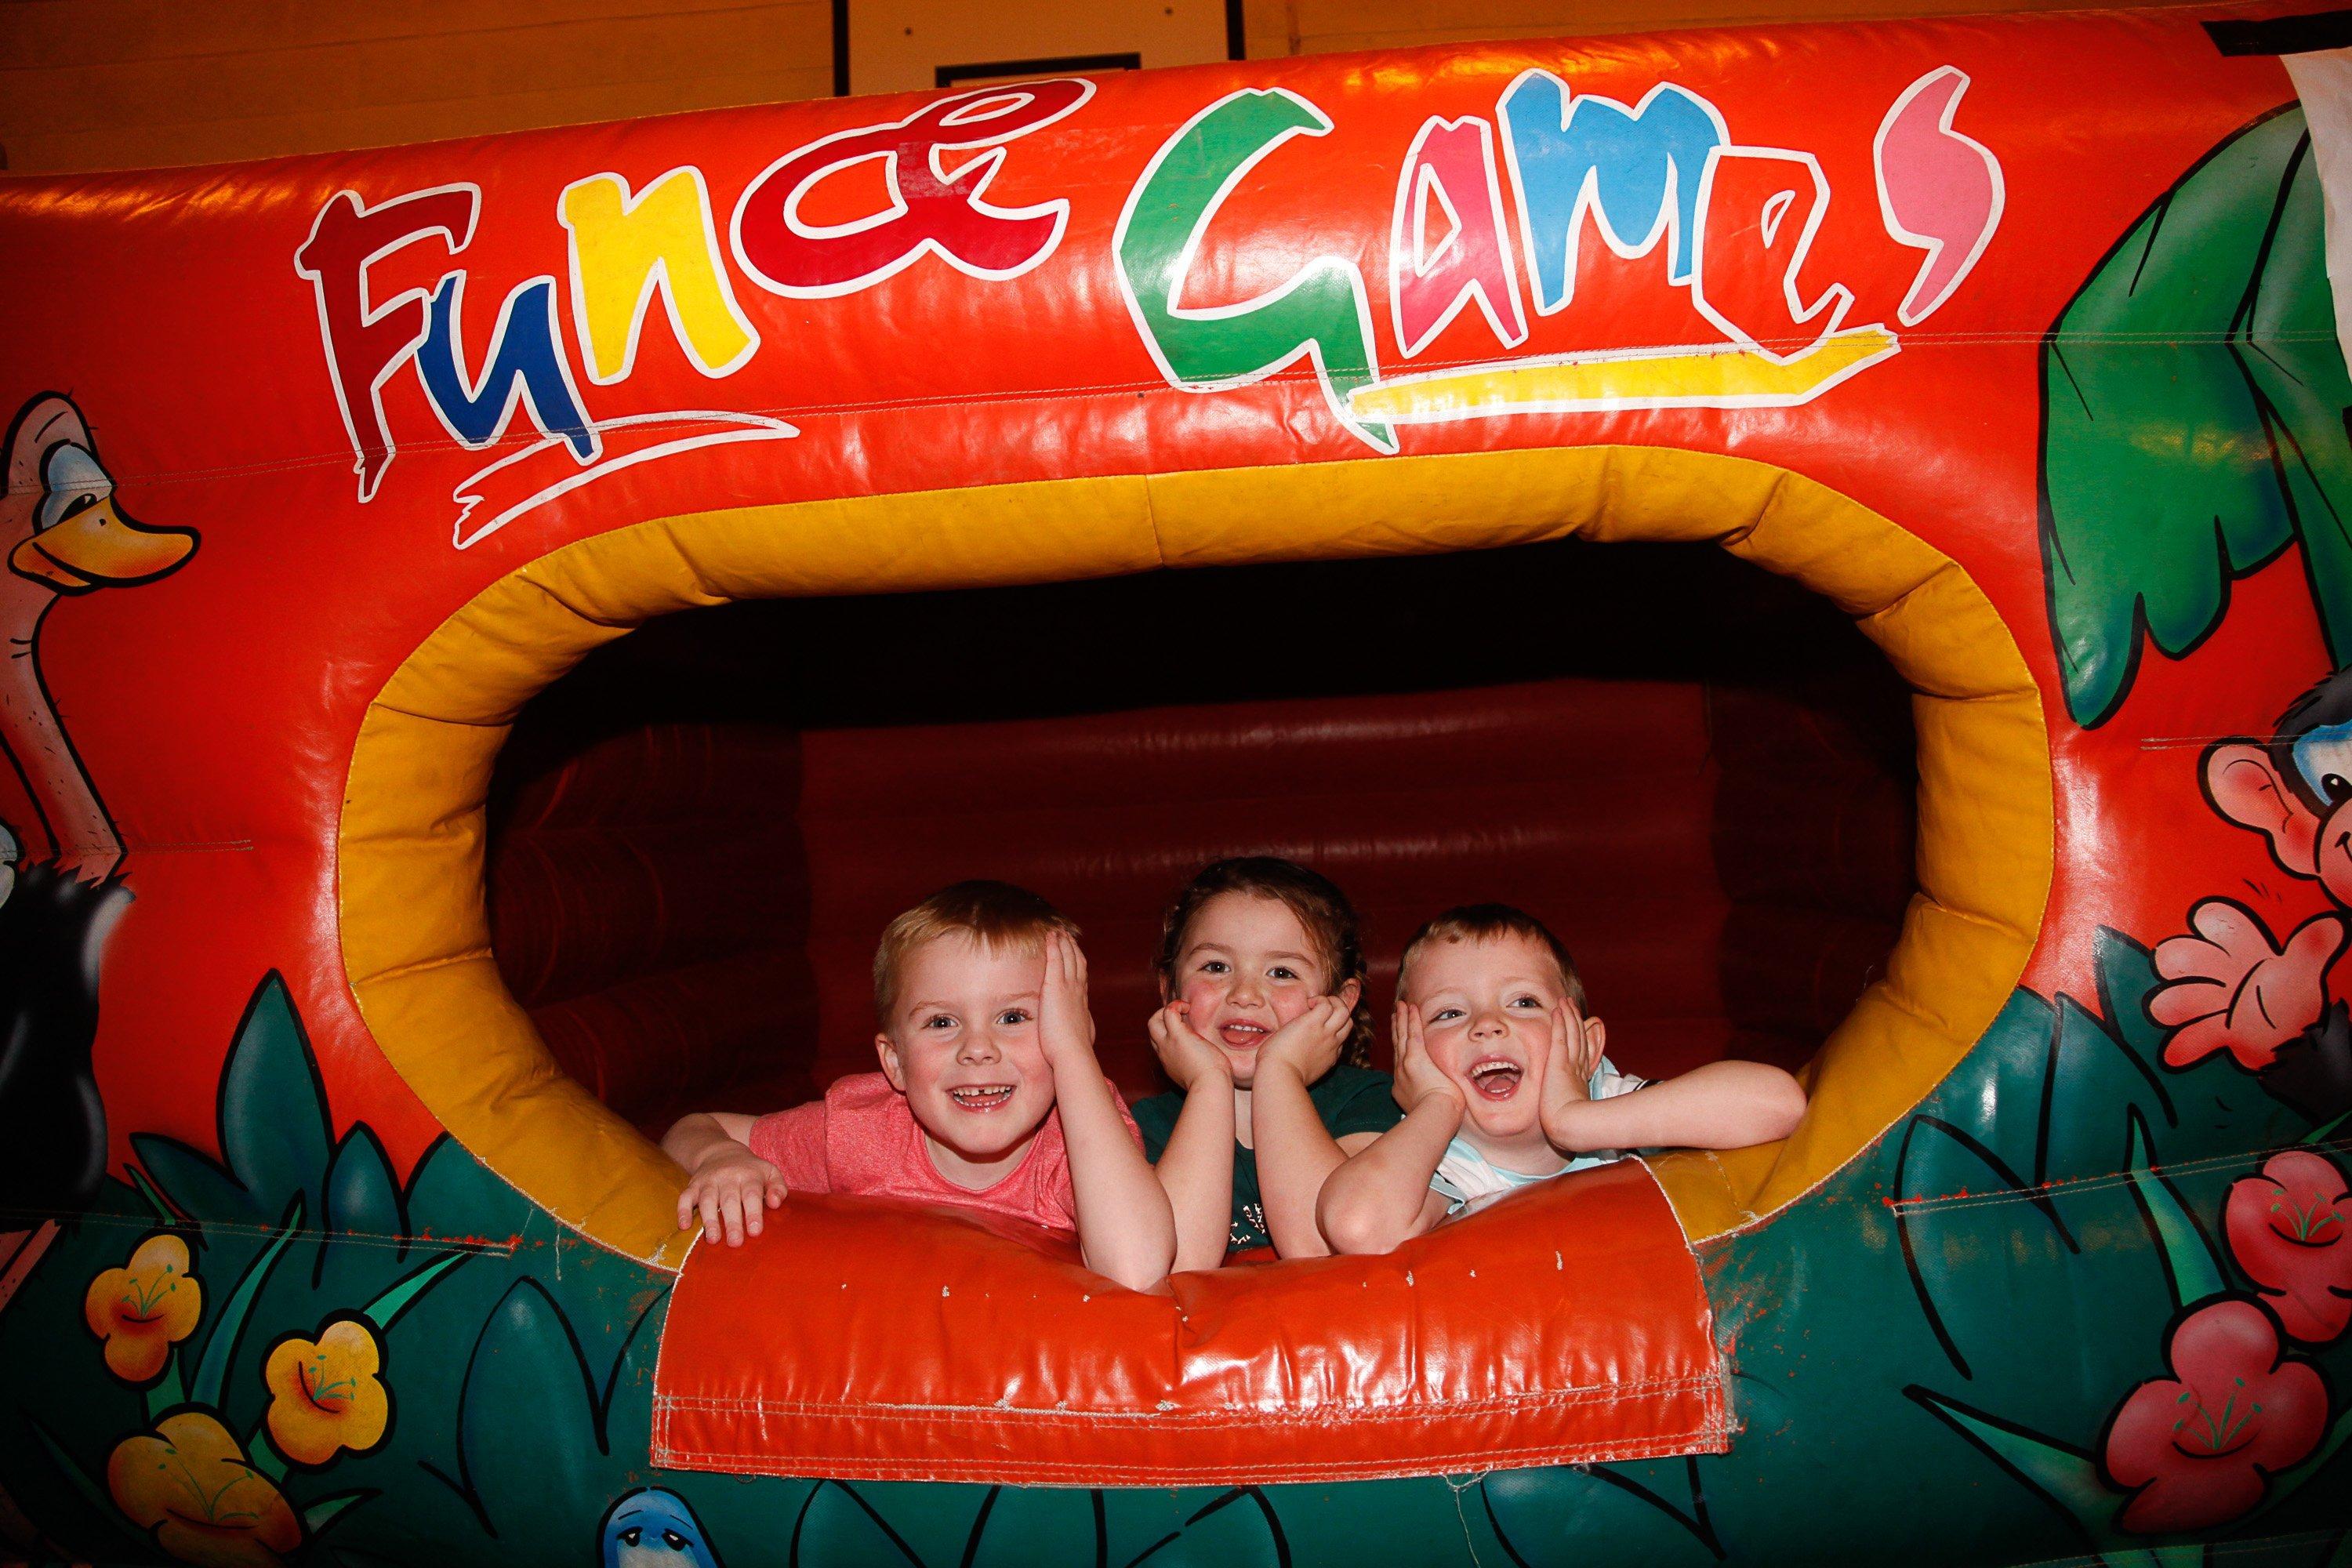 Camelon Winter Festival on Sunday, November 24. Four-year-olds Jacob, Isla and Parker enjoy the inflatables. Picture by Scott Louden.